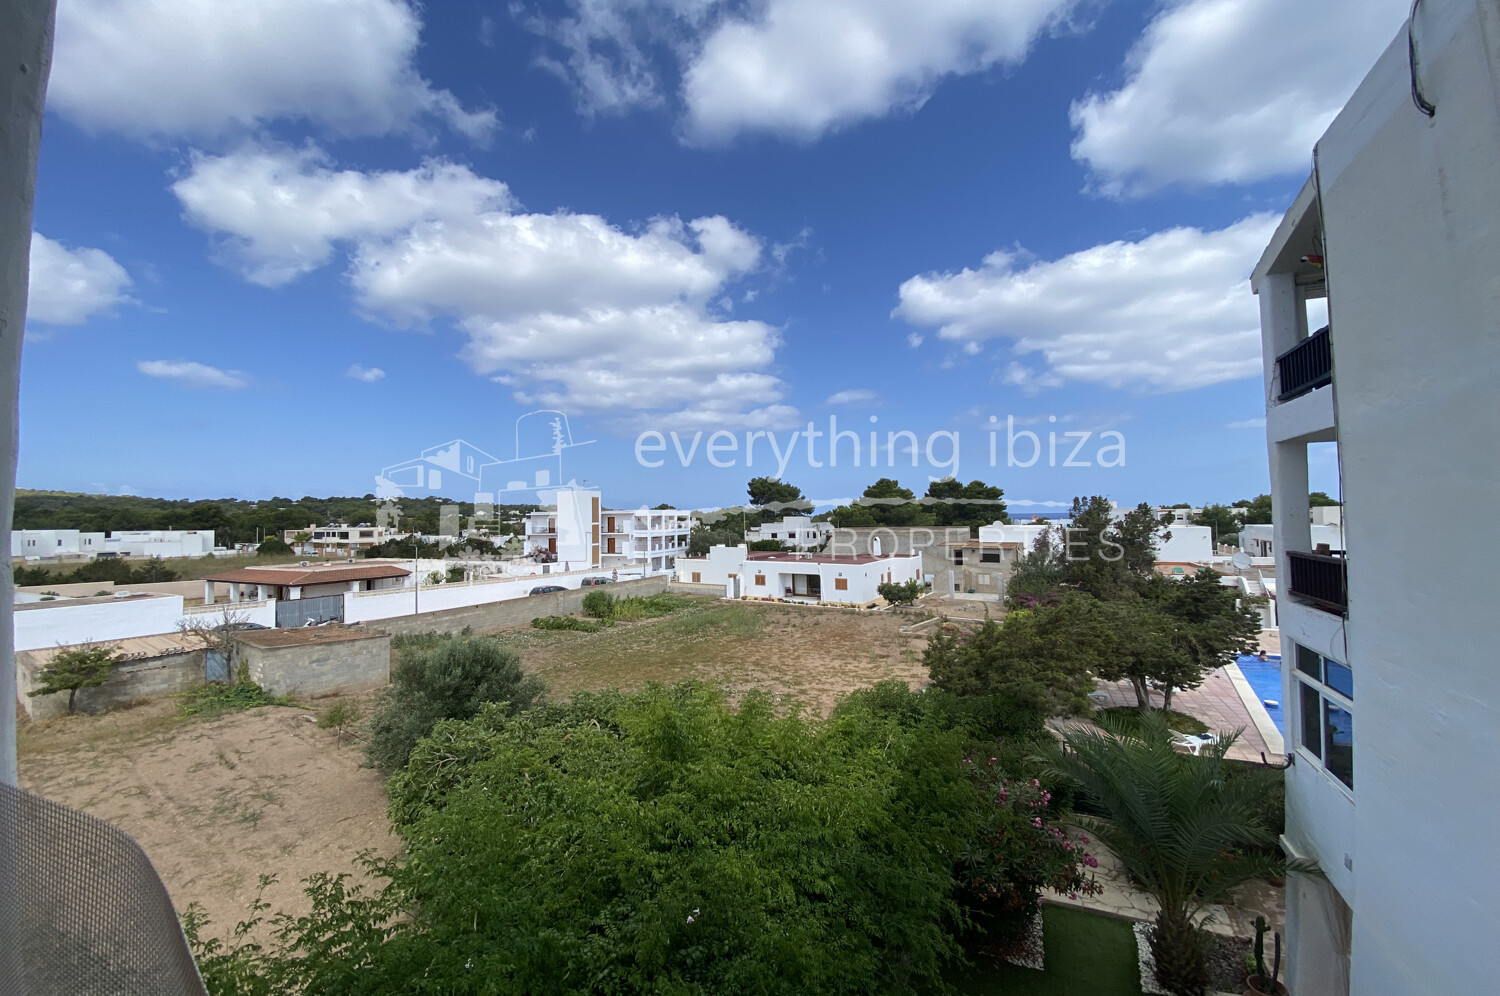 Charming Homely Two Bedroomed Apartment Close to the Beach, ref. 1611, for sale in Ibiza by everything ibiza Properties